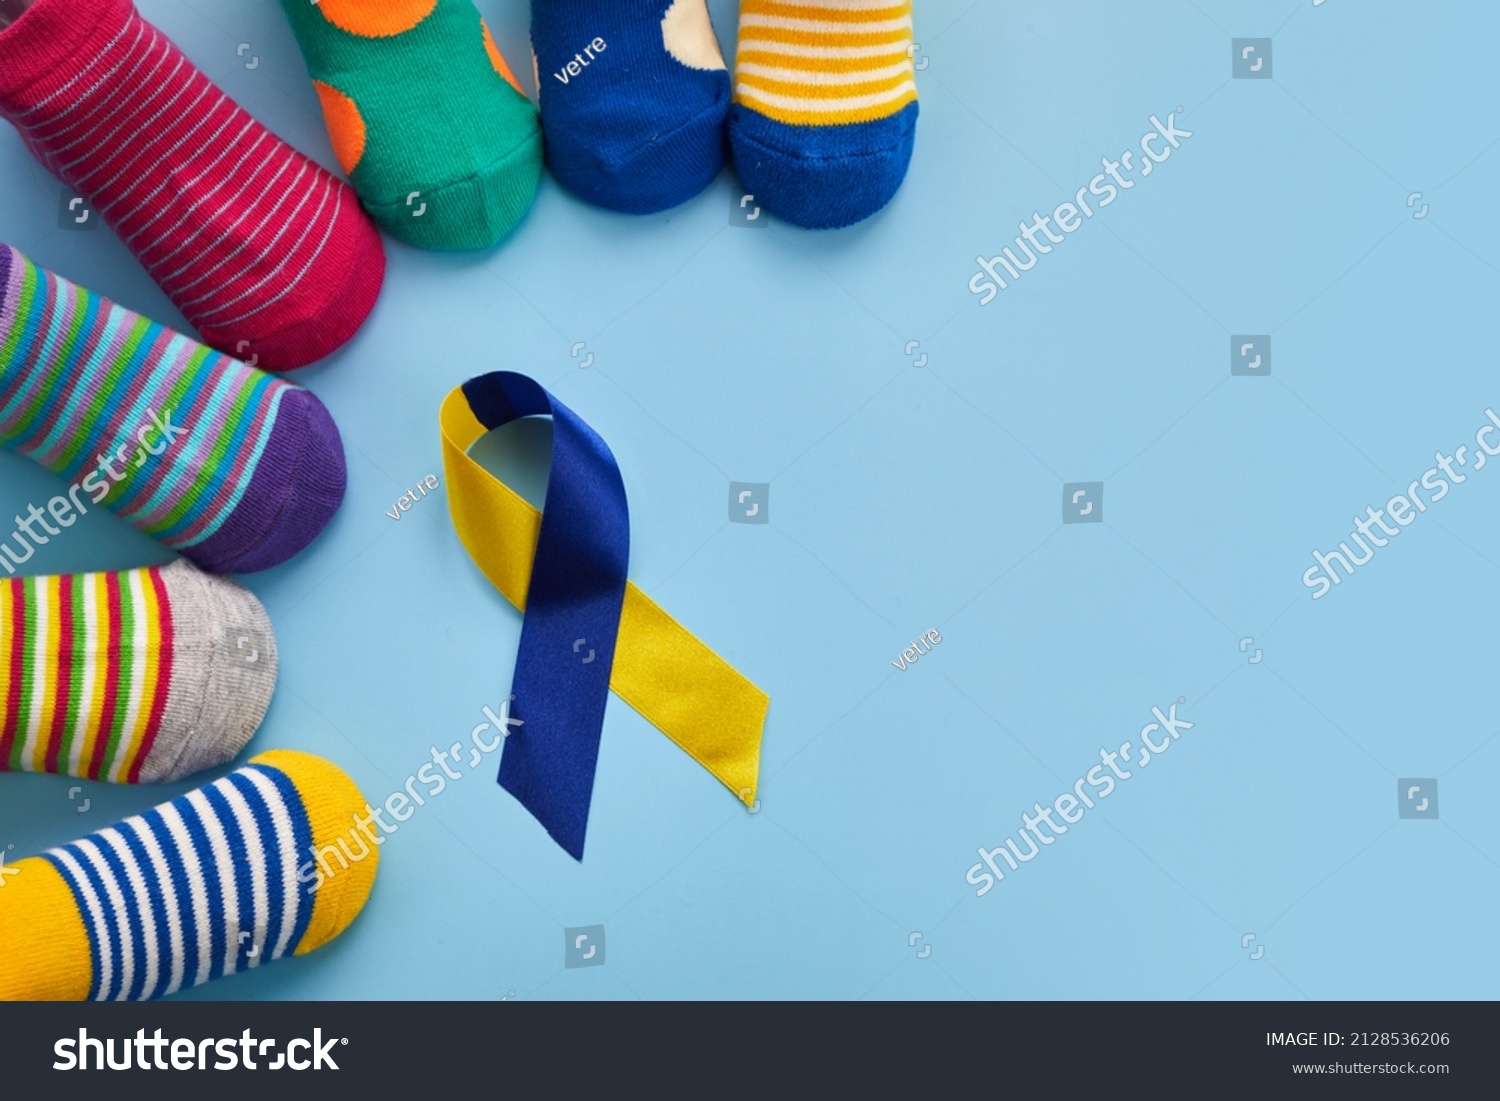 World Down syndrome day background. Down syndrome awareness concept. Socks and ribbon on blue background #2128536206